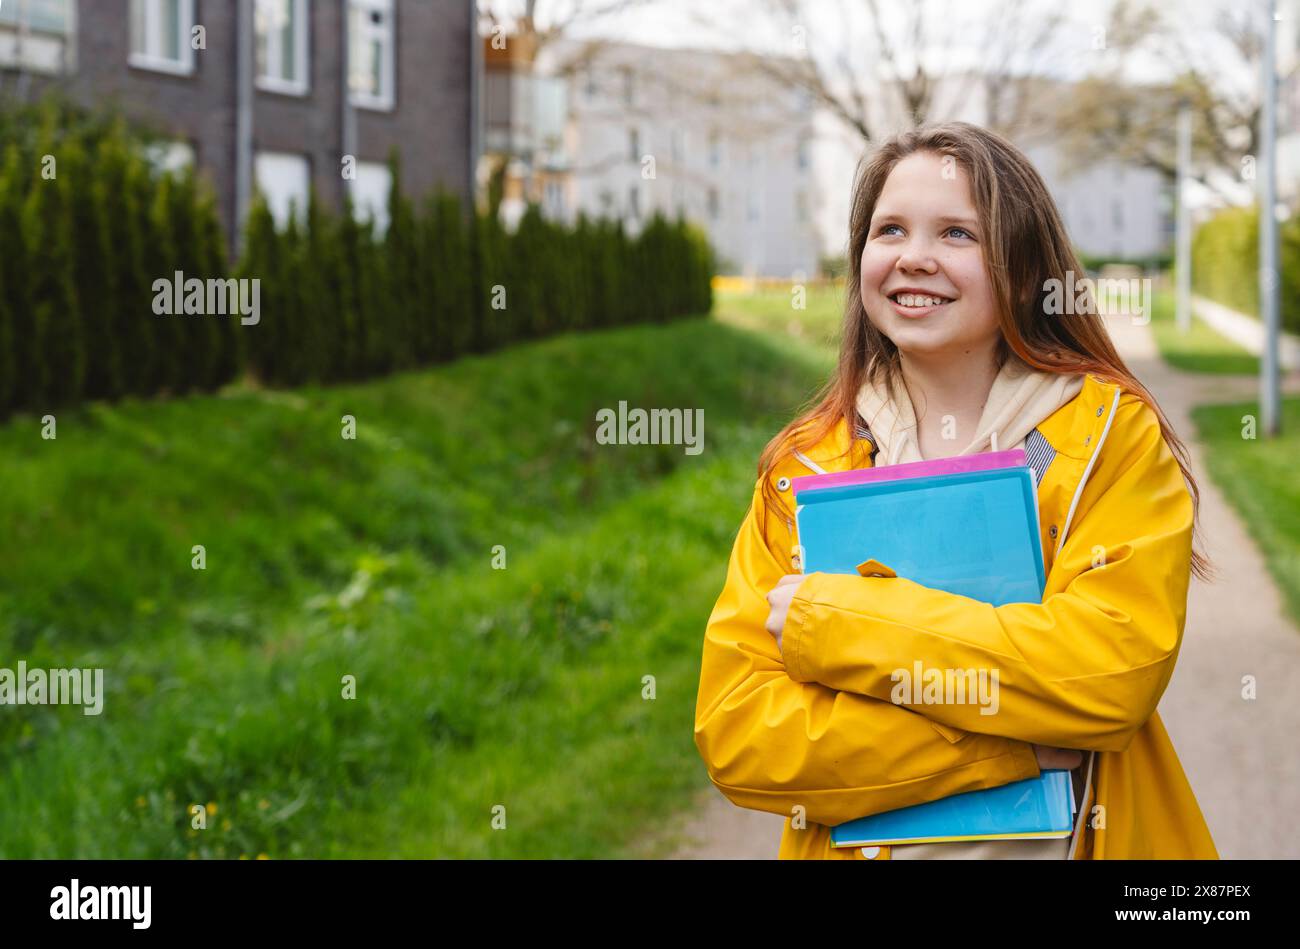 Smiling girl holding folders and standing on footpath Stock Photo